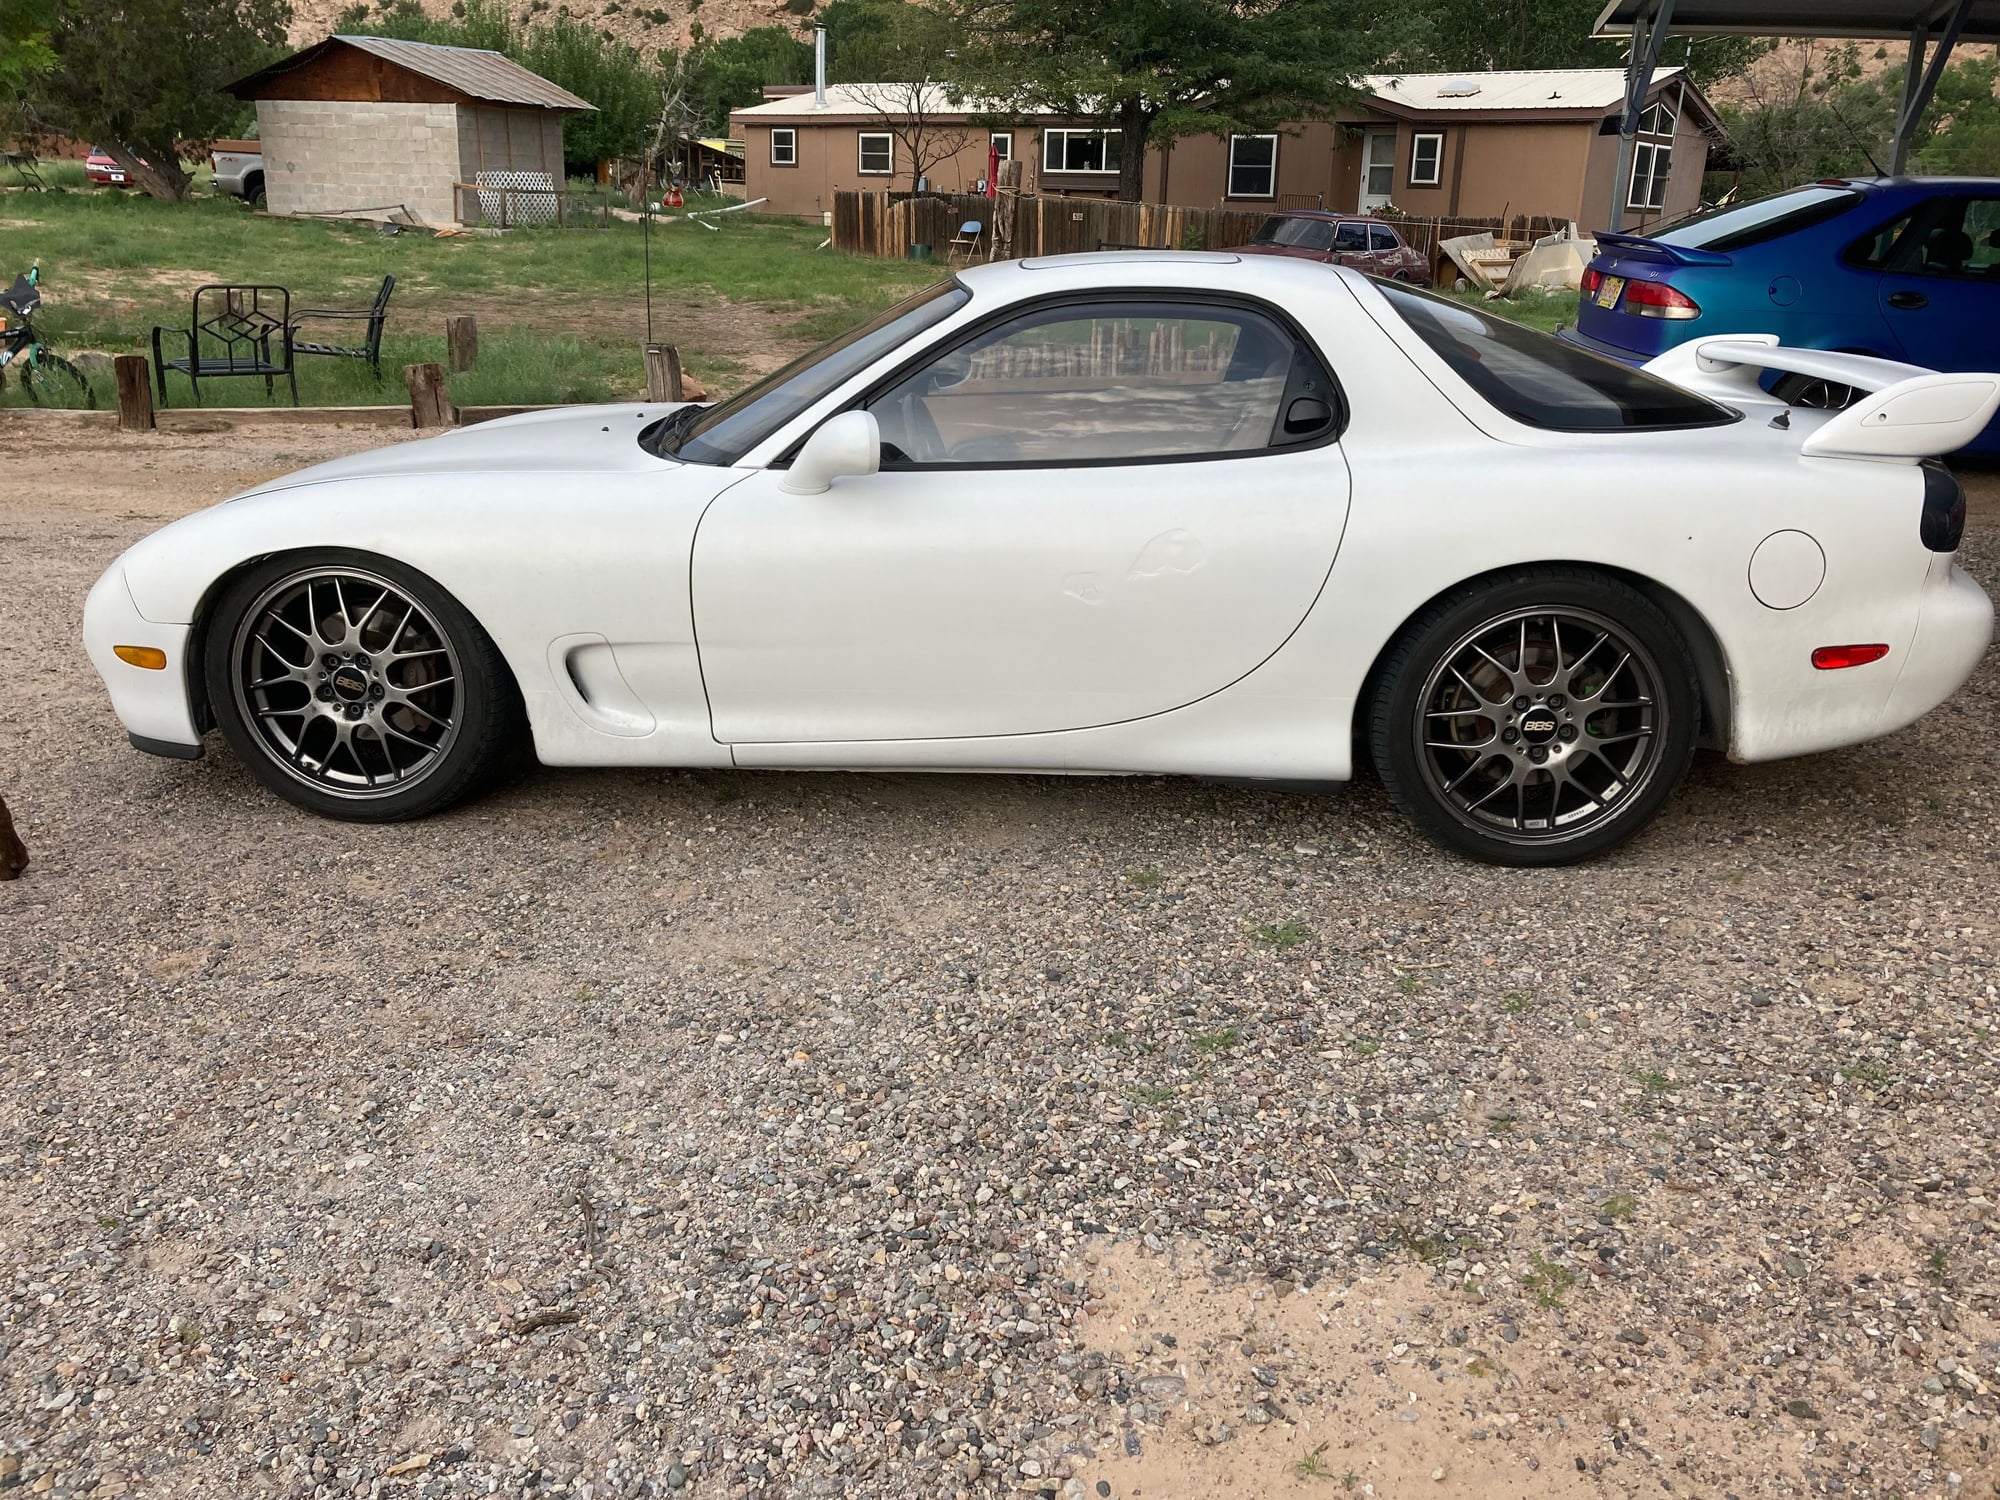 Wheels and Tires/Axles - Bbs rg737 18” - Used - All Years Mazda RX-7 - Hernandez, NM 87537, United States